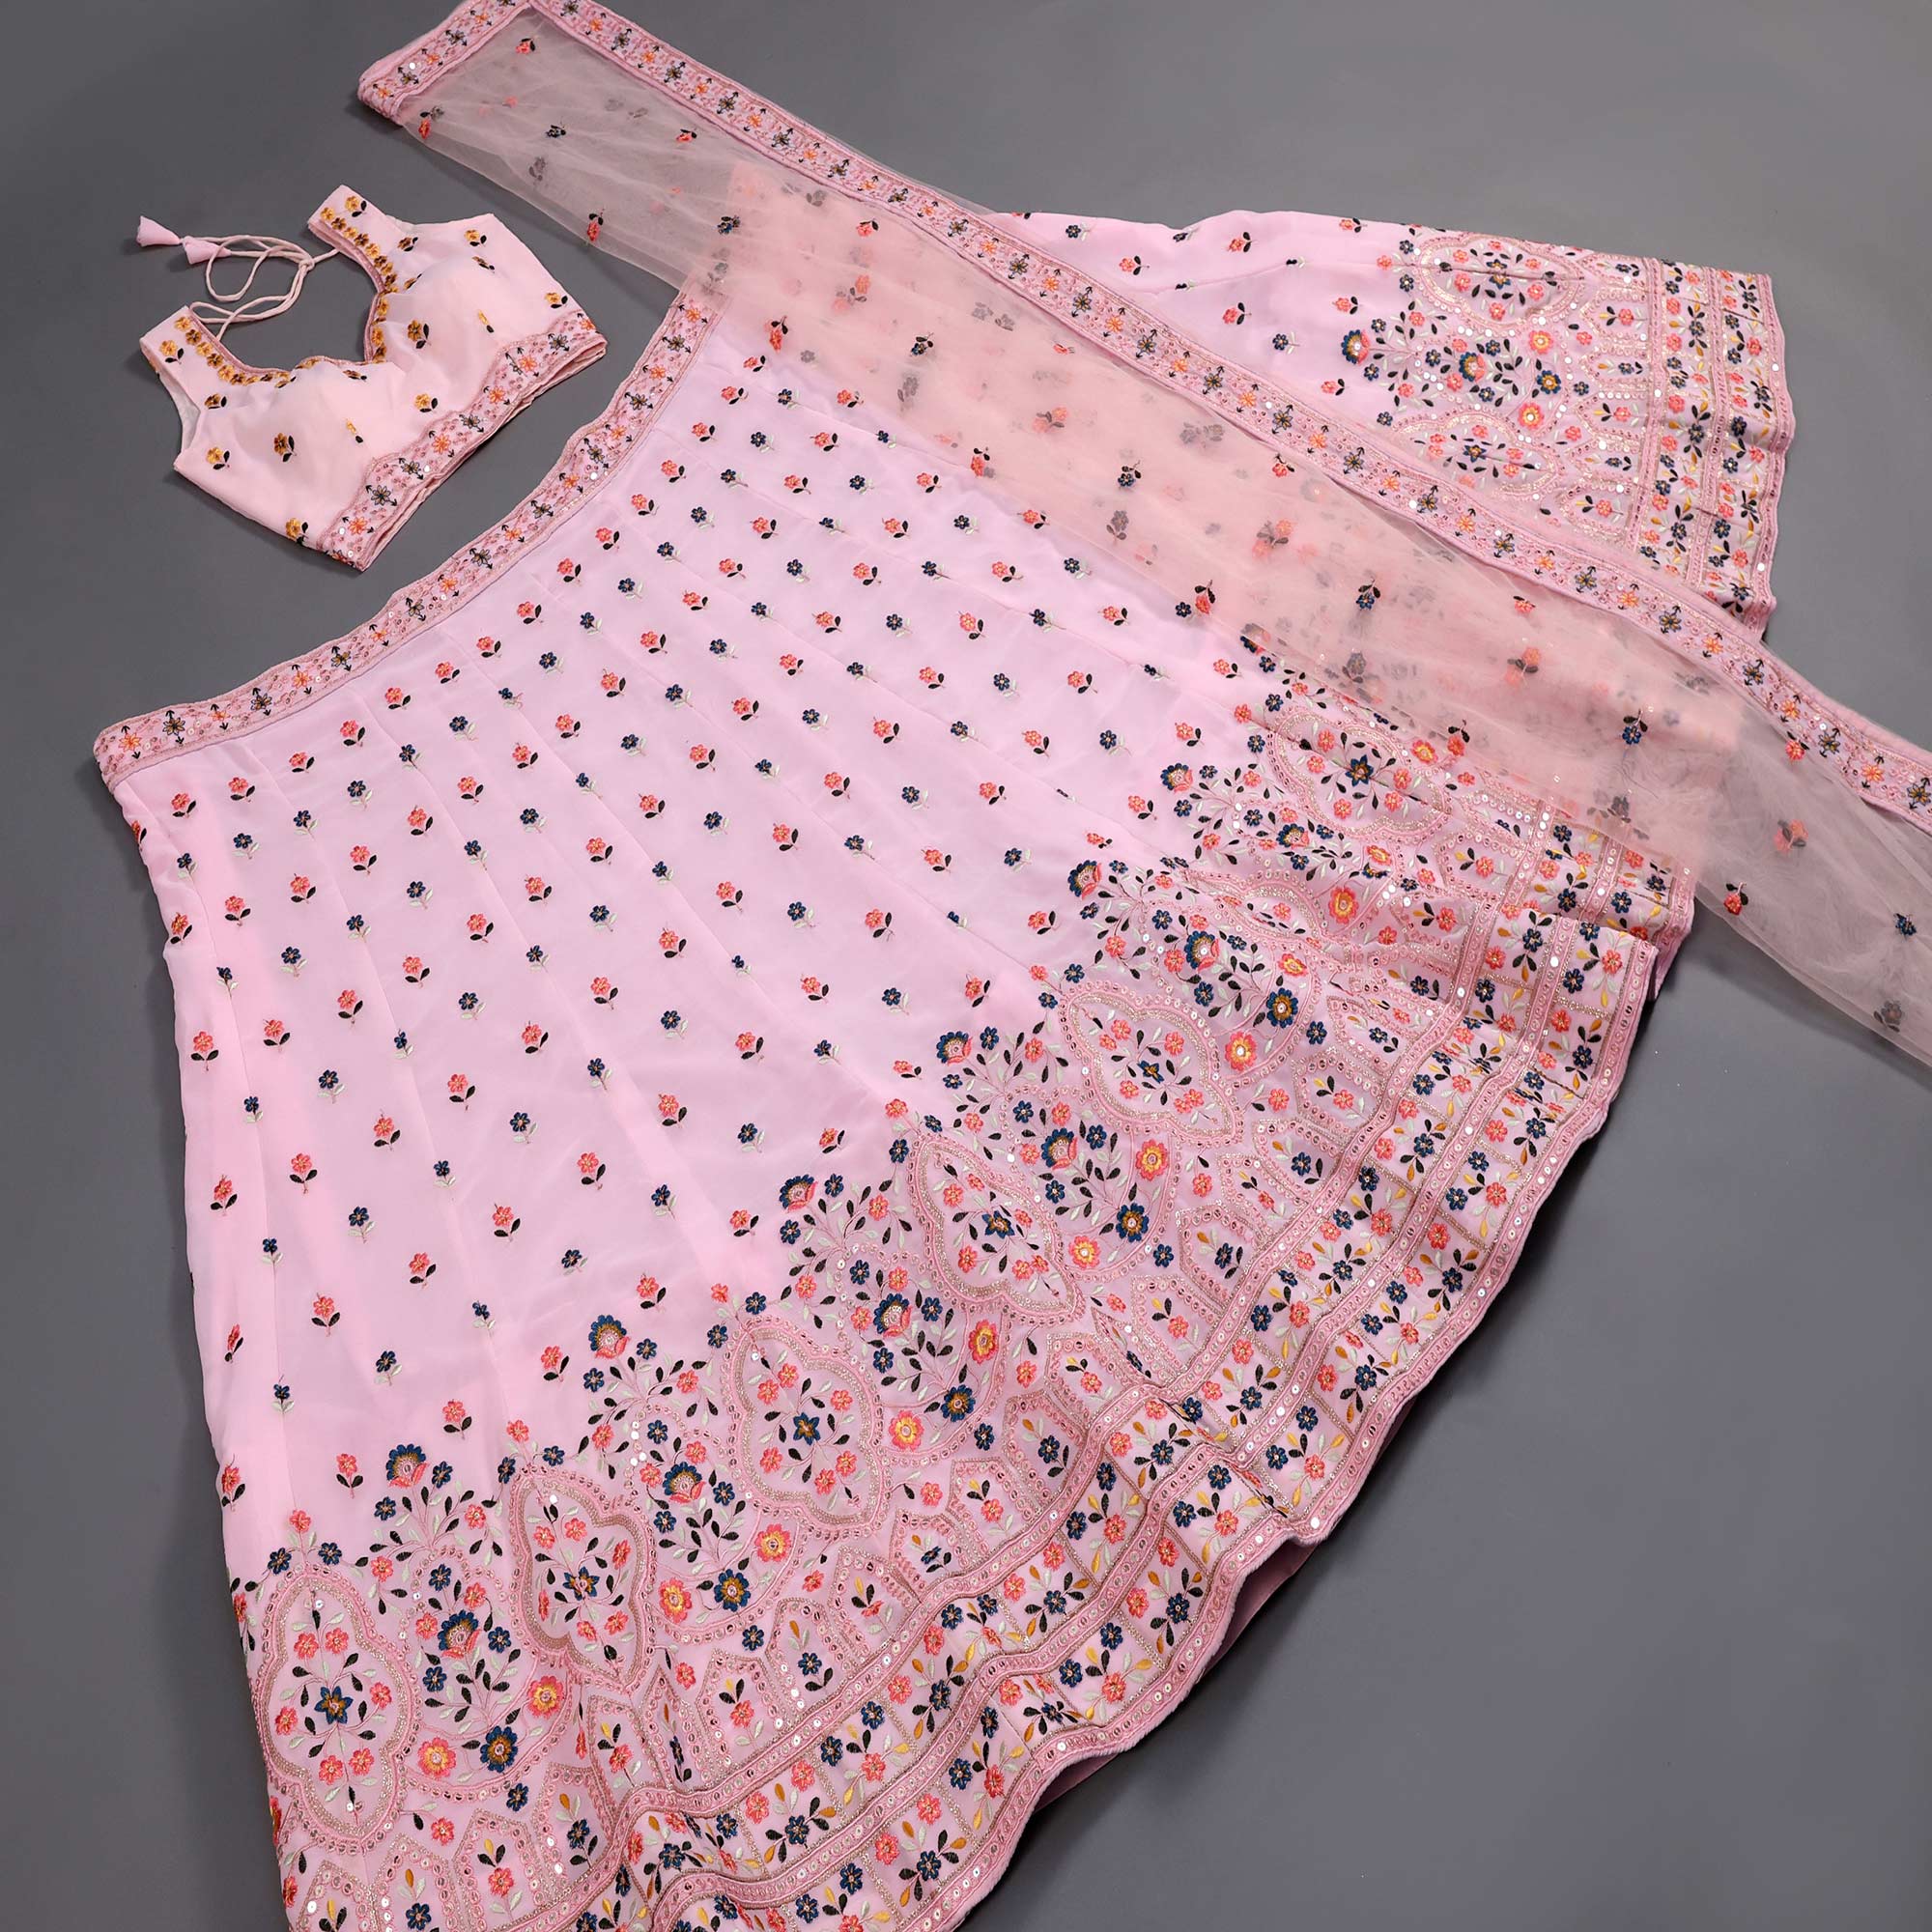 Baby Pink Sequins Embroidered Georgette Lehenga Choli